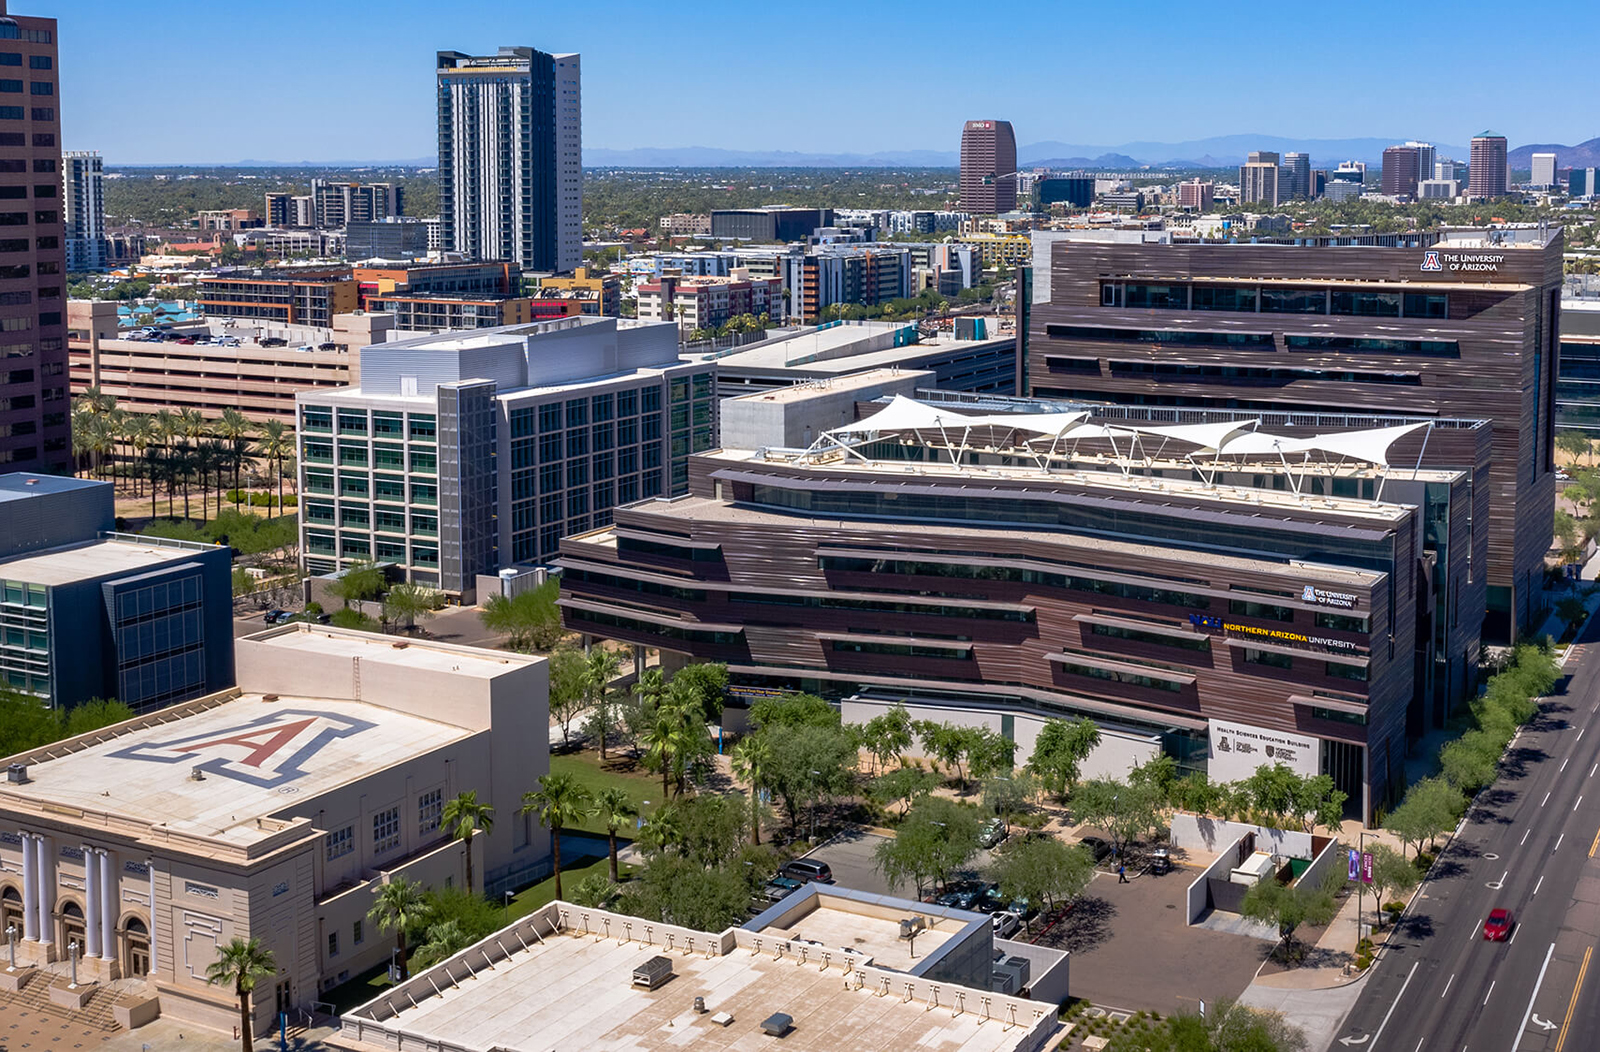 Drone Shot of the Phoenix Biomedical Campus